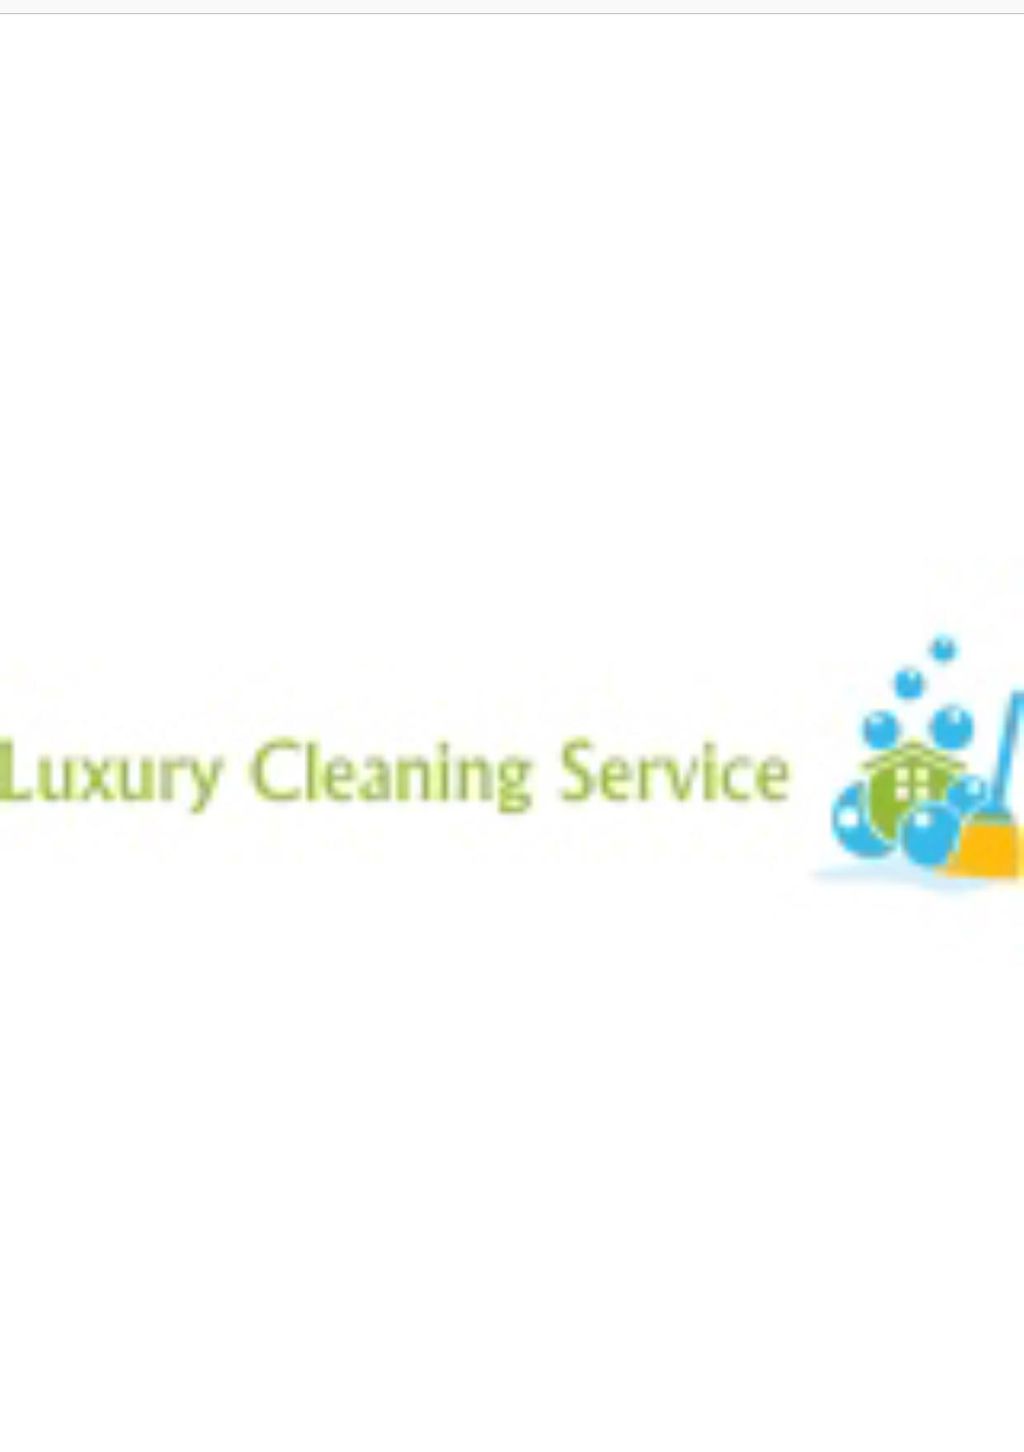 Luxury Cleaning Service